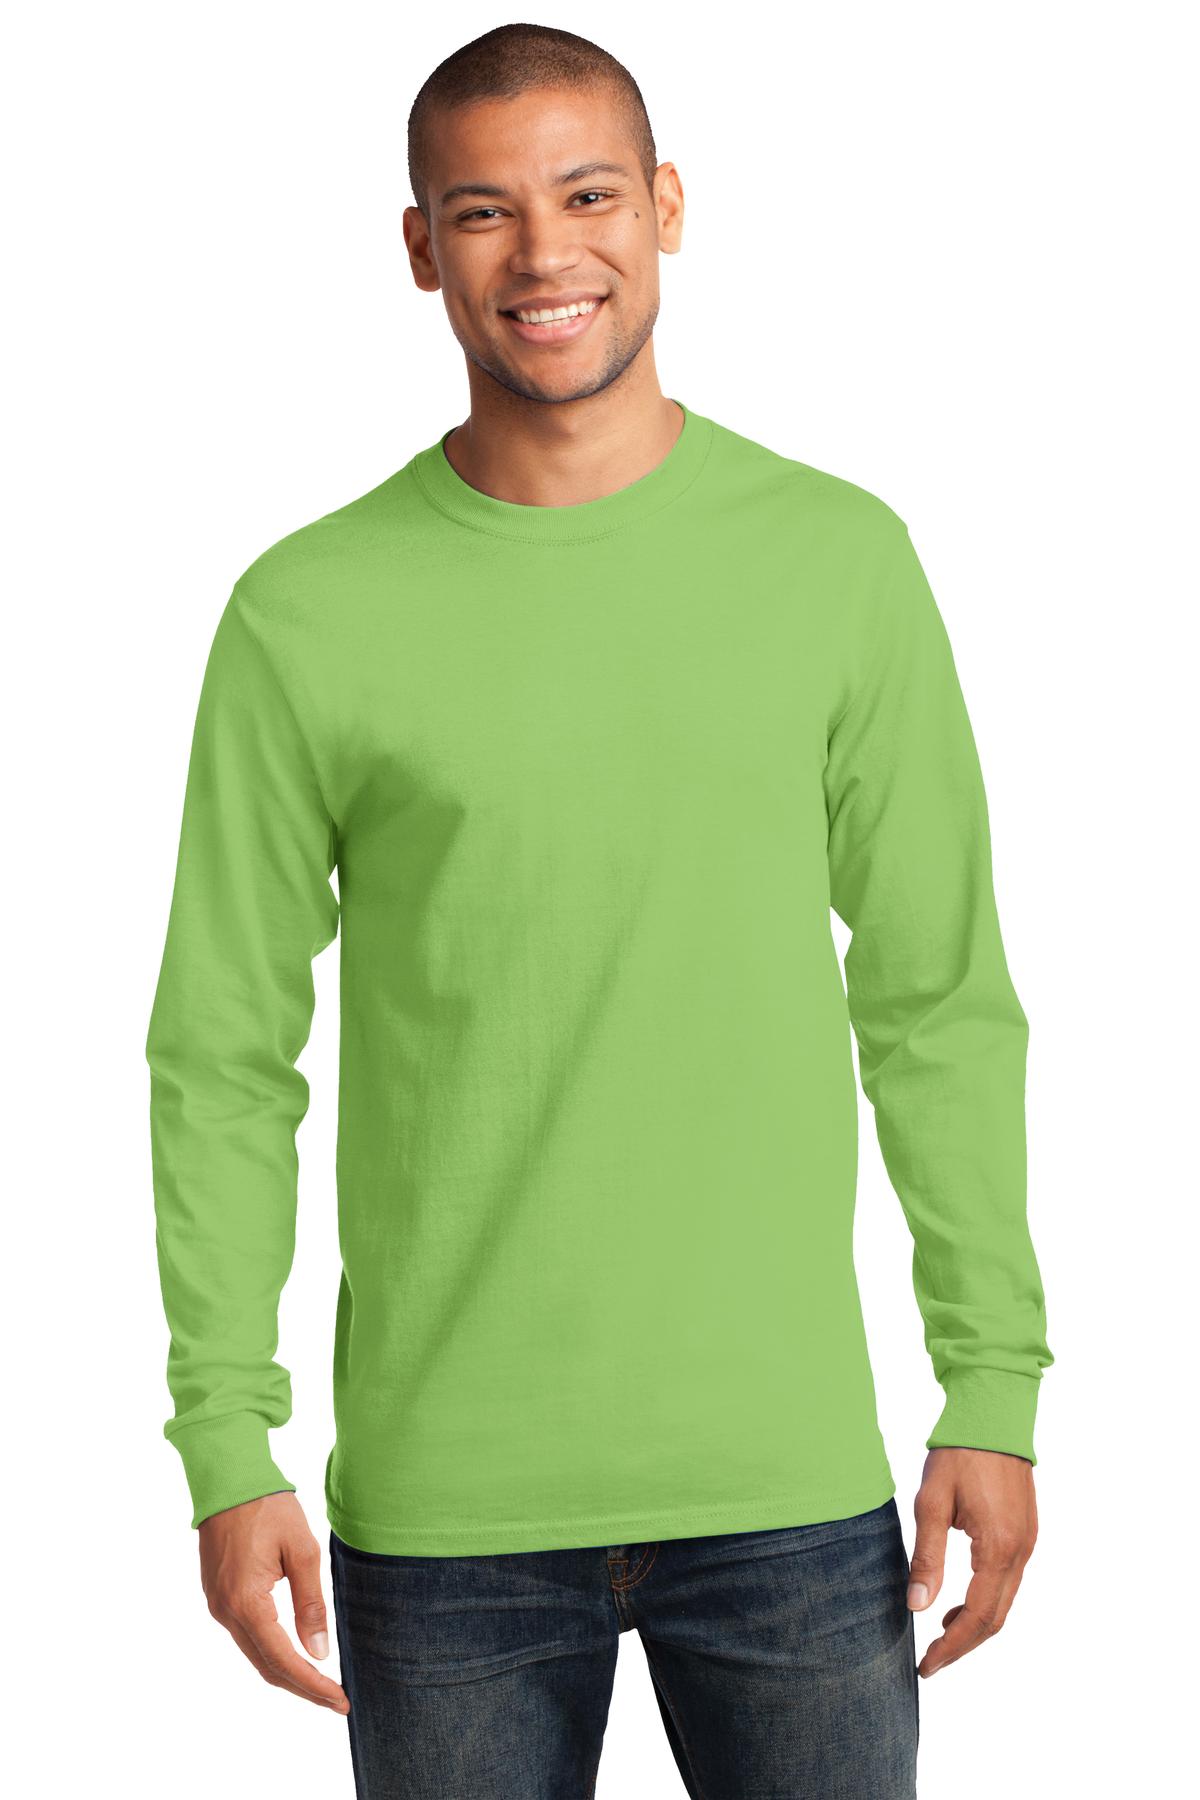 PC61LS-Lime-S